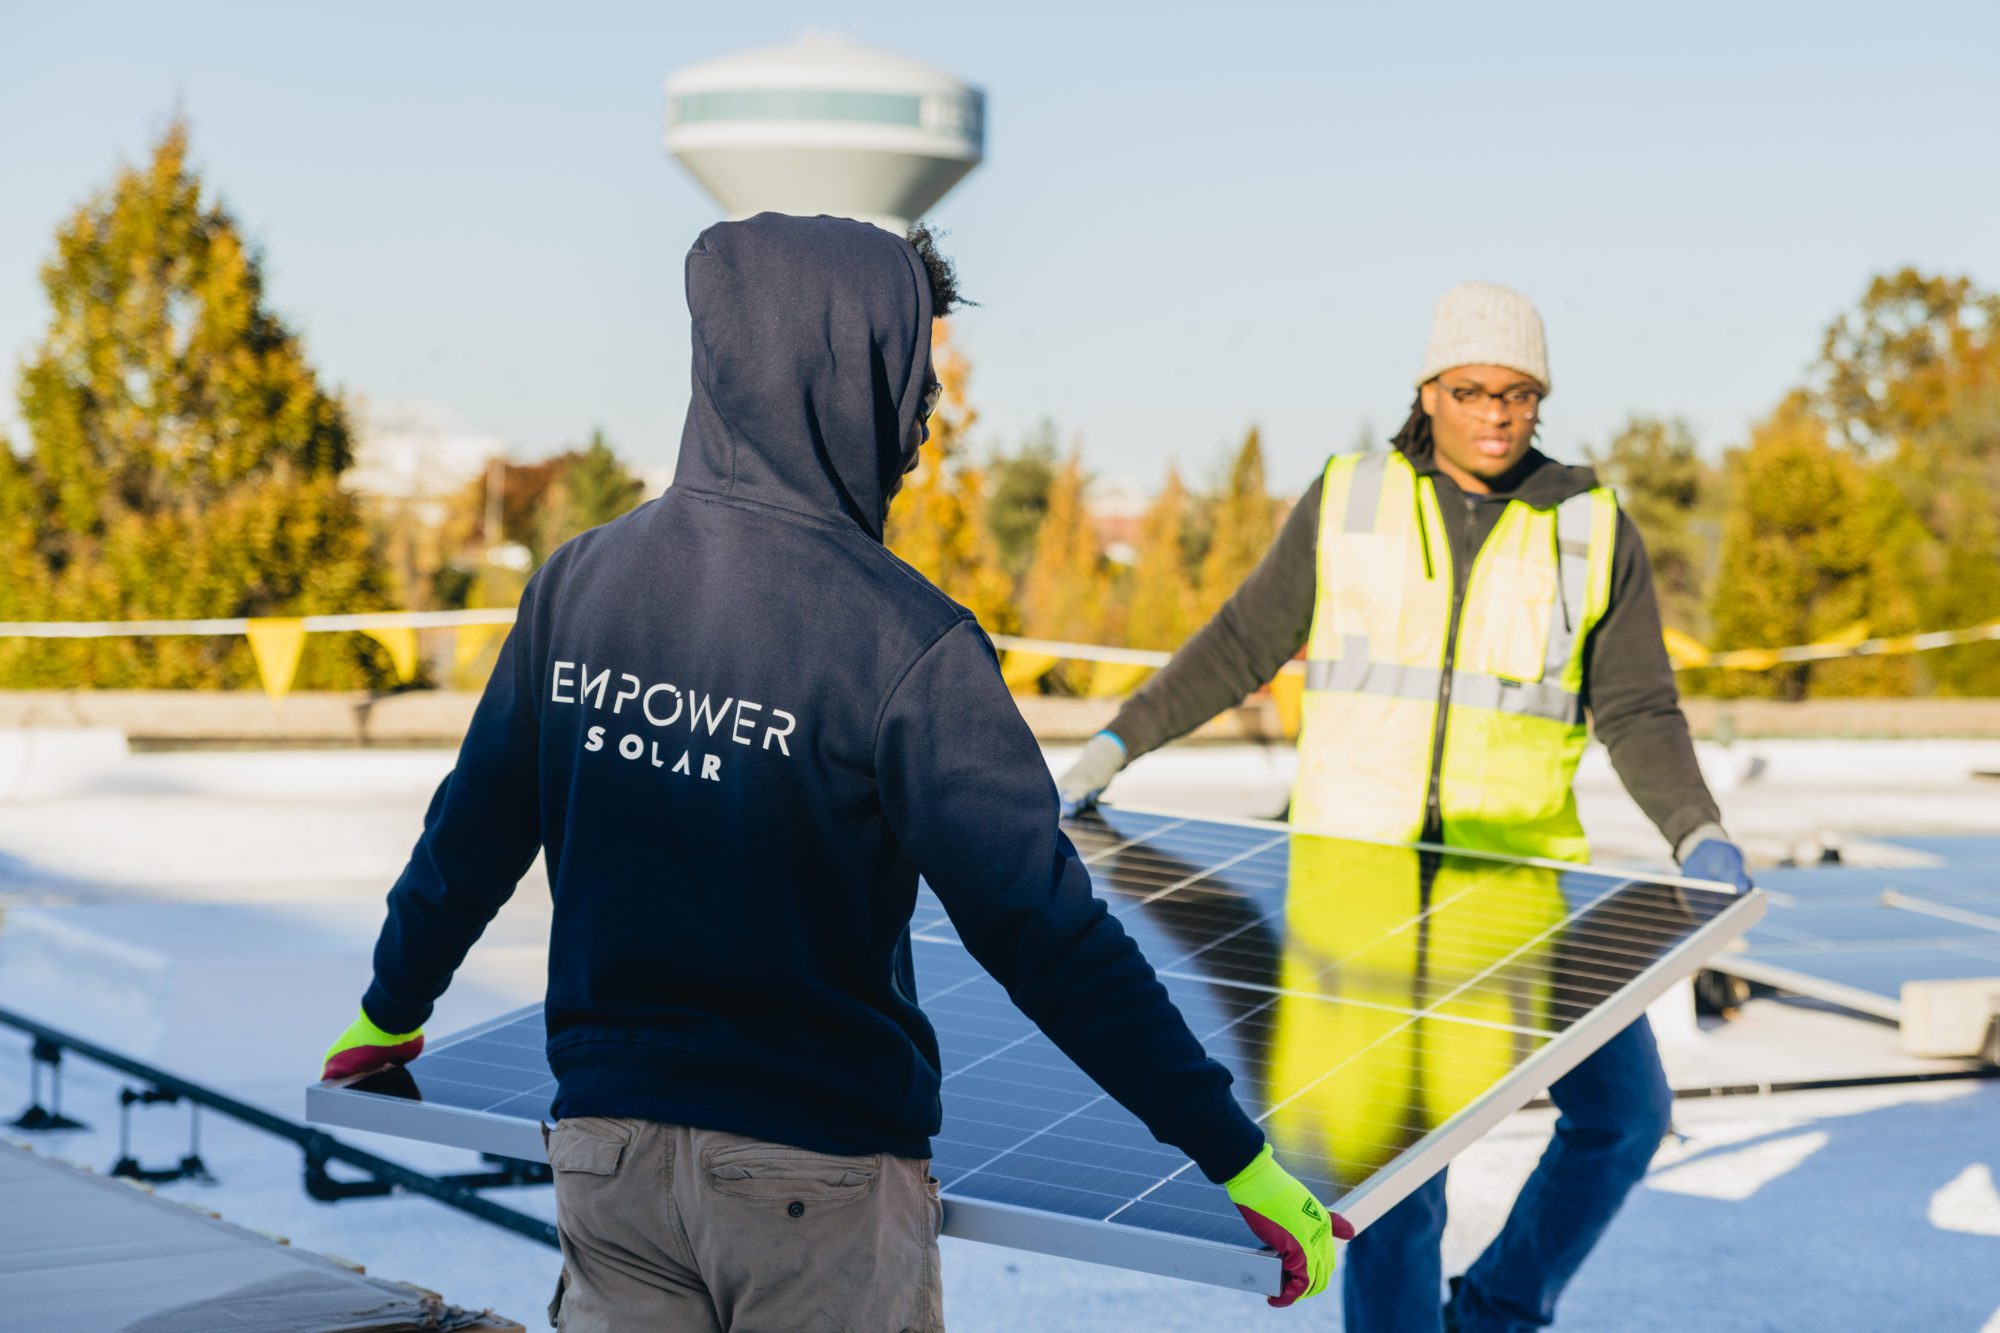 EmPower Solar employees working together